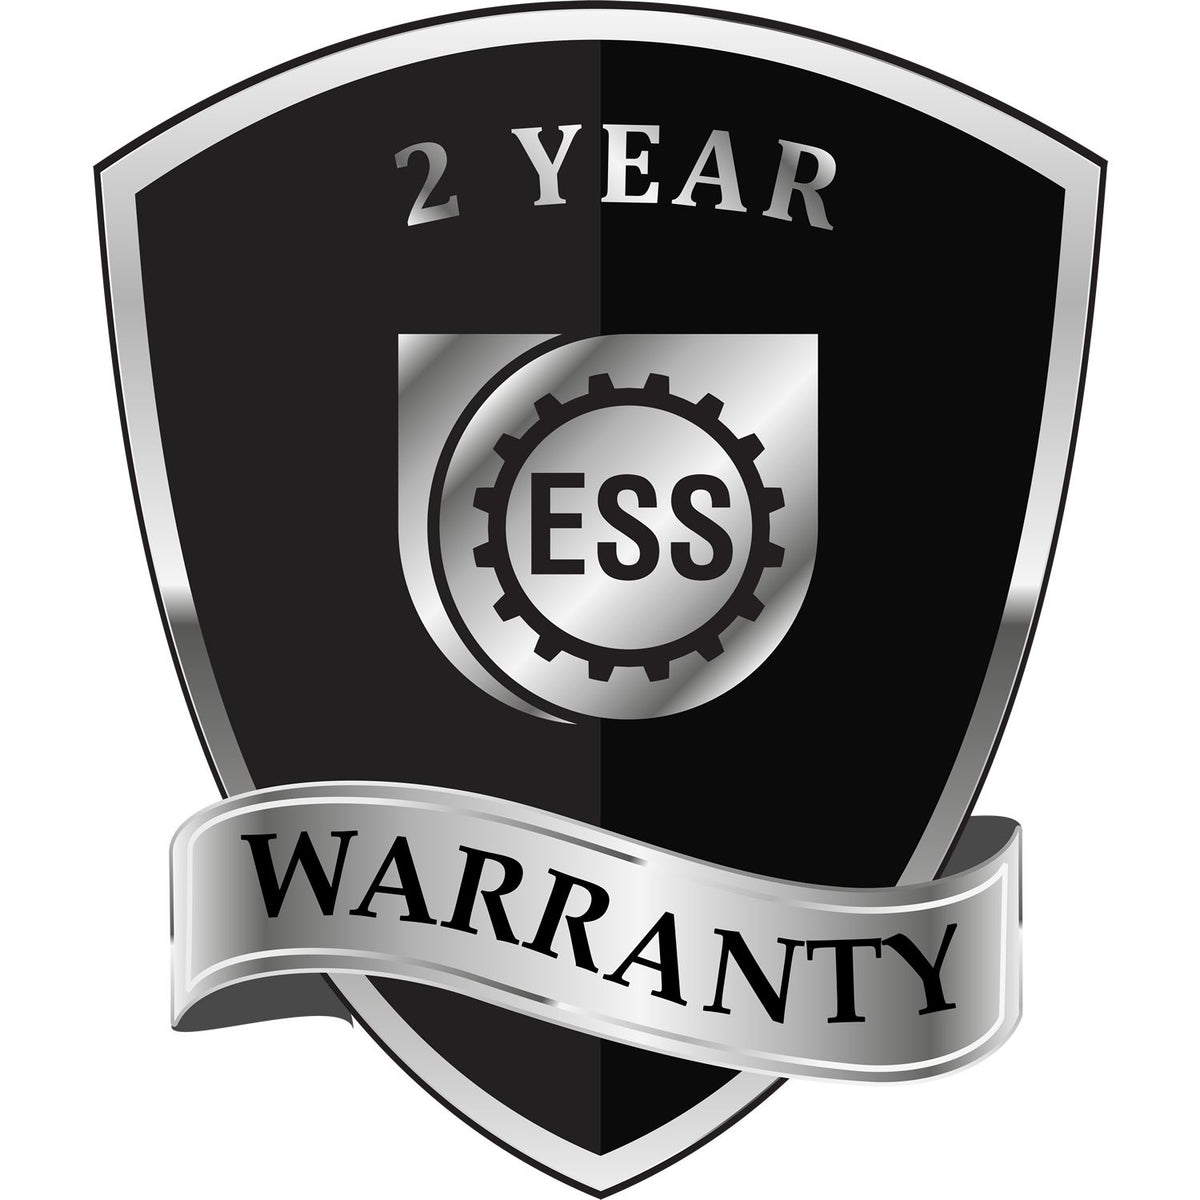 A badge or emblem showing a warranty icon for the Long Reach Ohio PE Seal